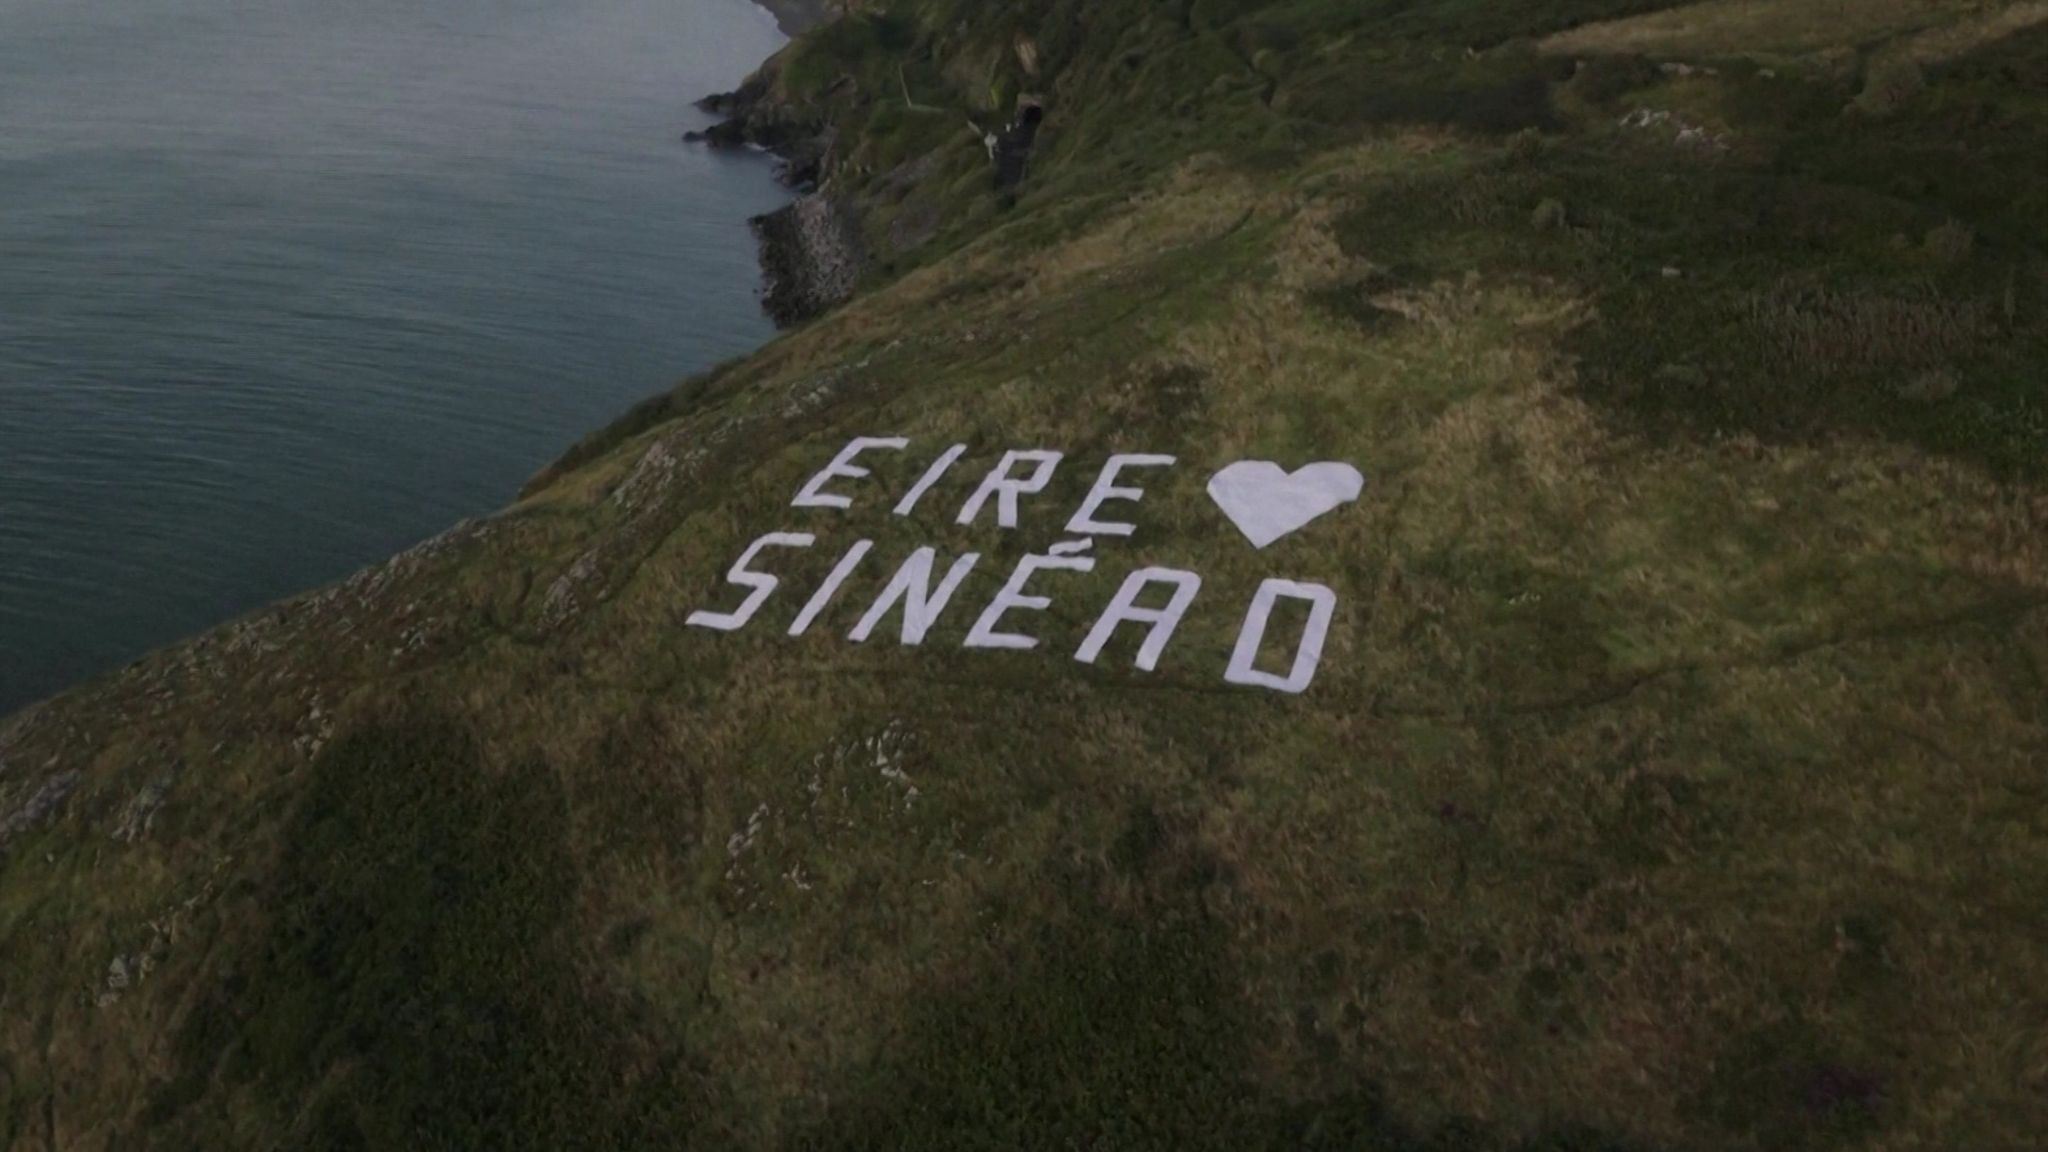 White lettering spells out "Eire loves Sinéad" on the top of a cliff close to Bray